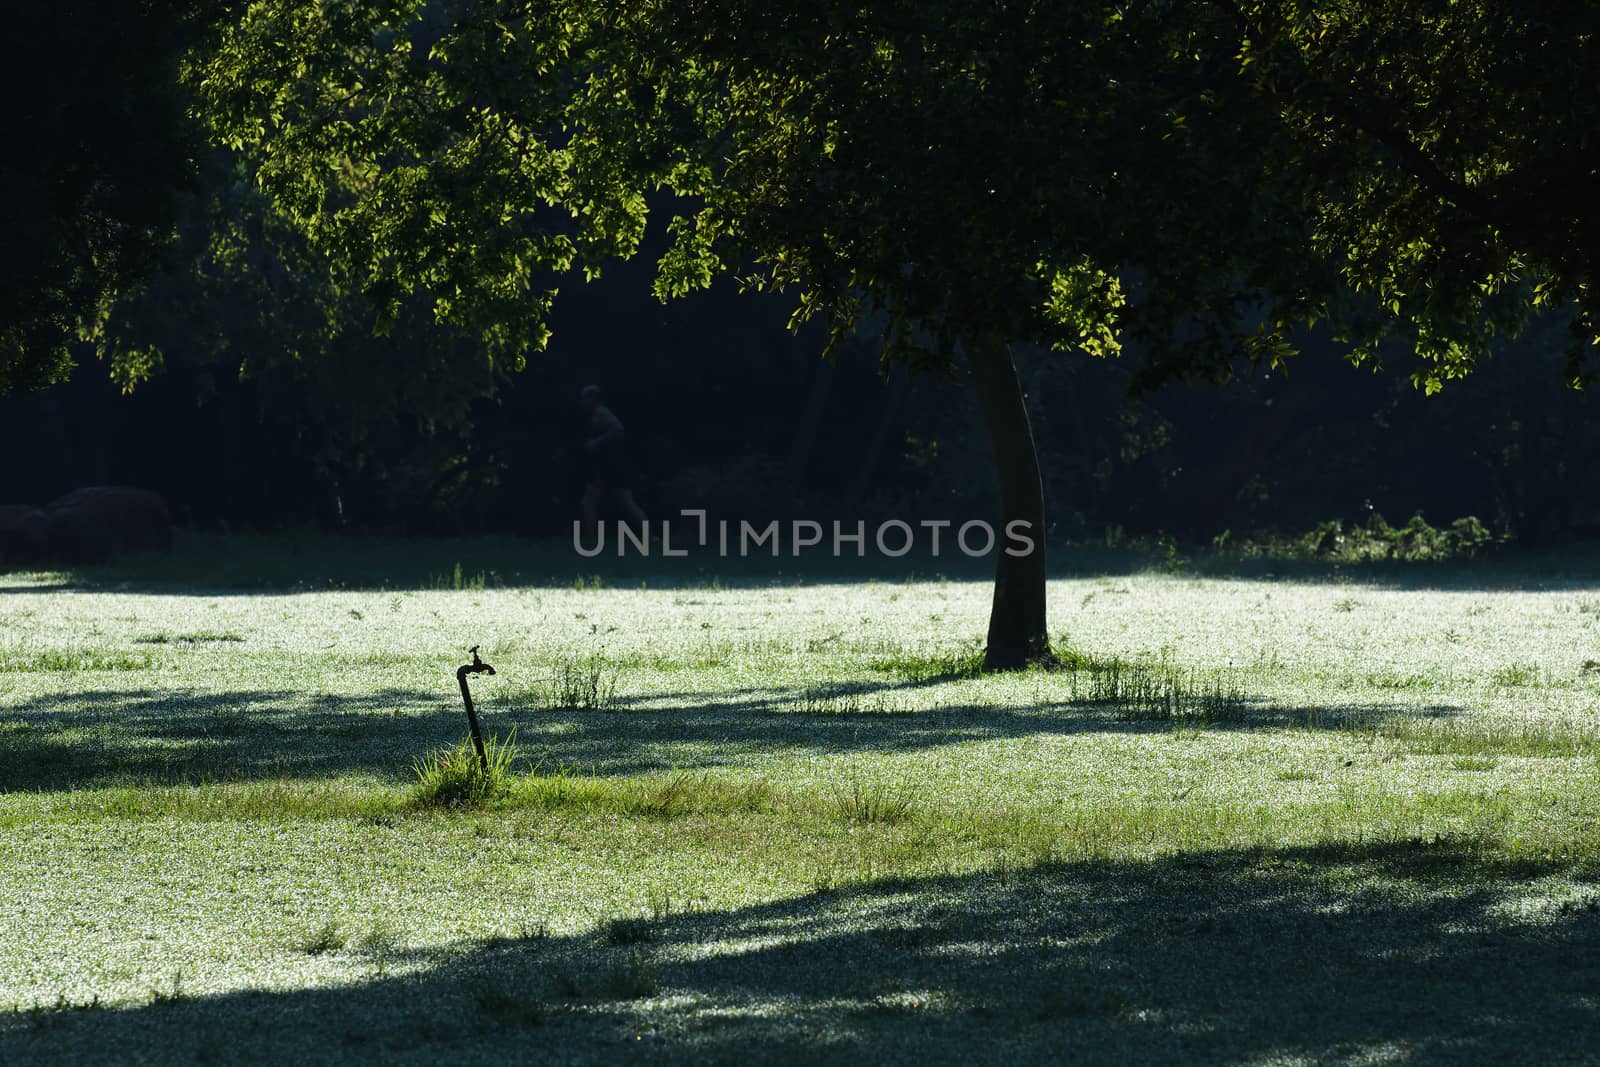 Early Morning Dew Covered Grass In Park by jjvanginkel